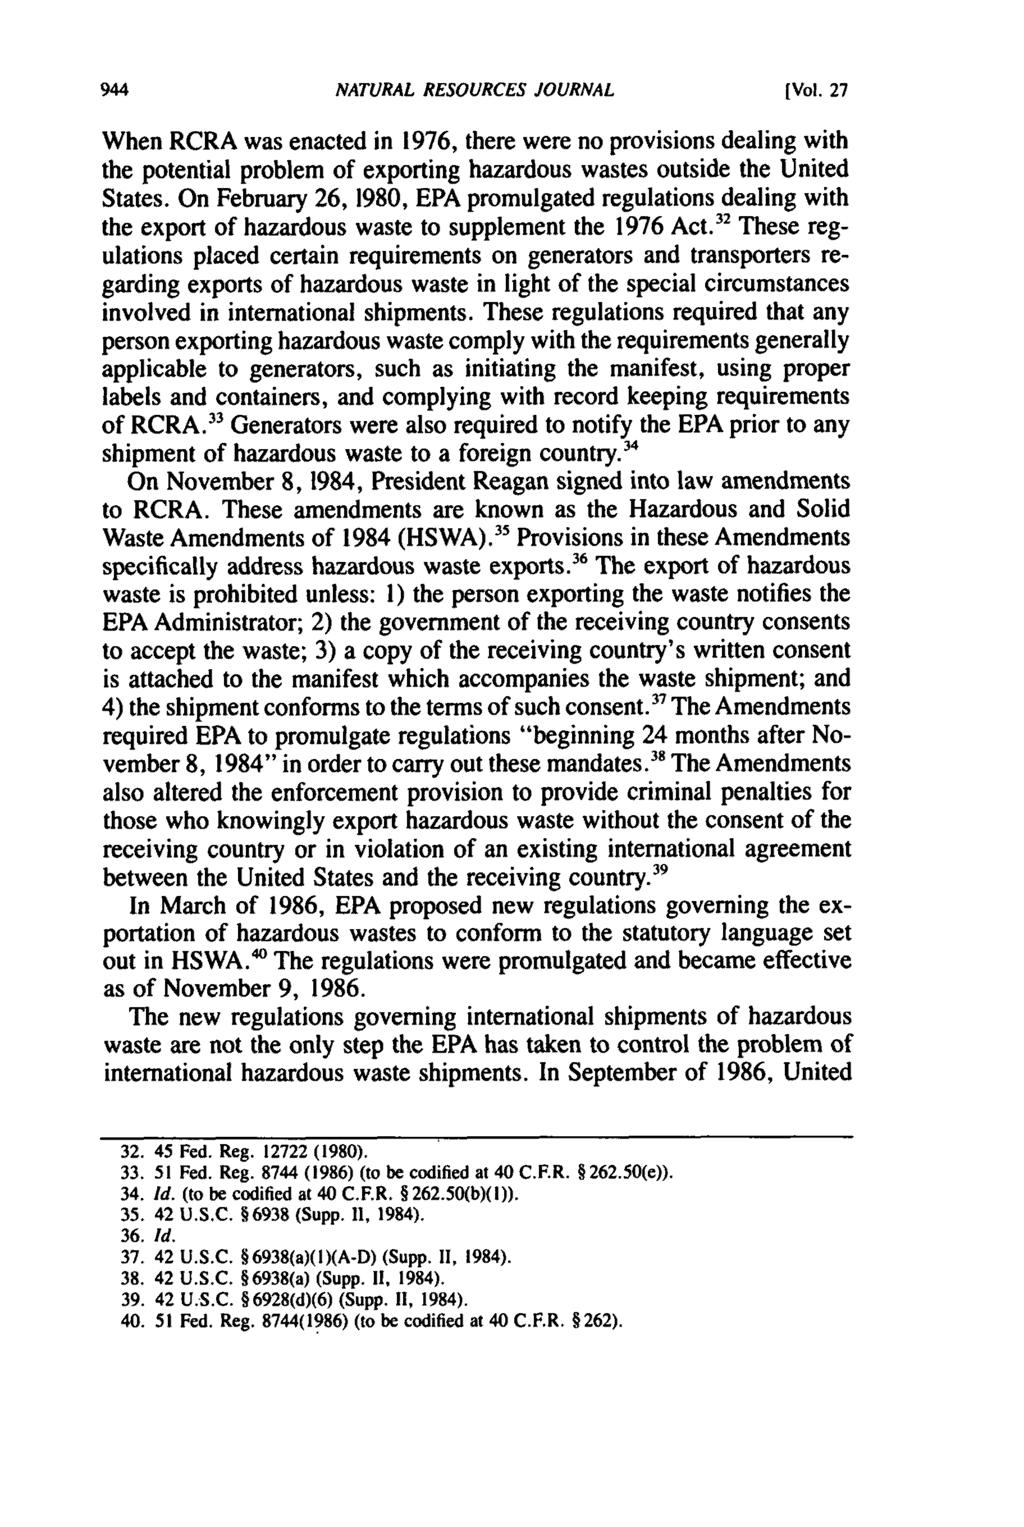 NATURAL RESOURCES JOURNAL [Vol. 27 When RCRA was enacted in 1976, there were no provisions dealing with the potential problem of exporting hazardous wastes outside the United States.